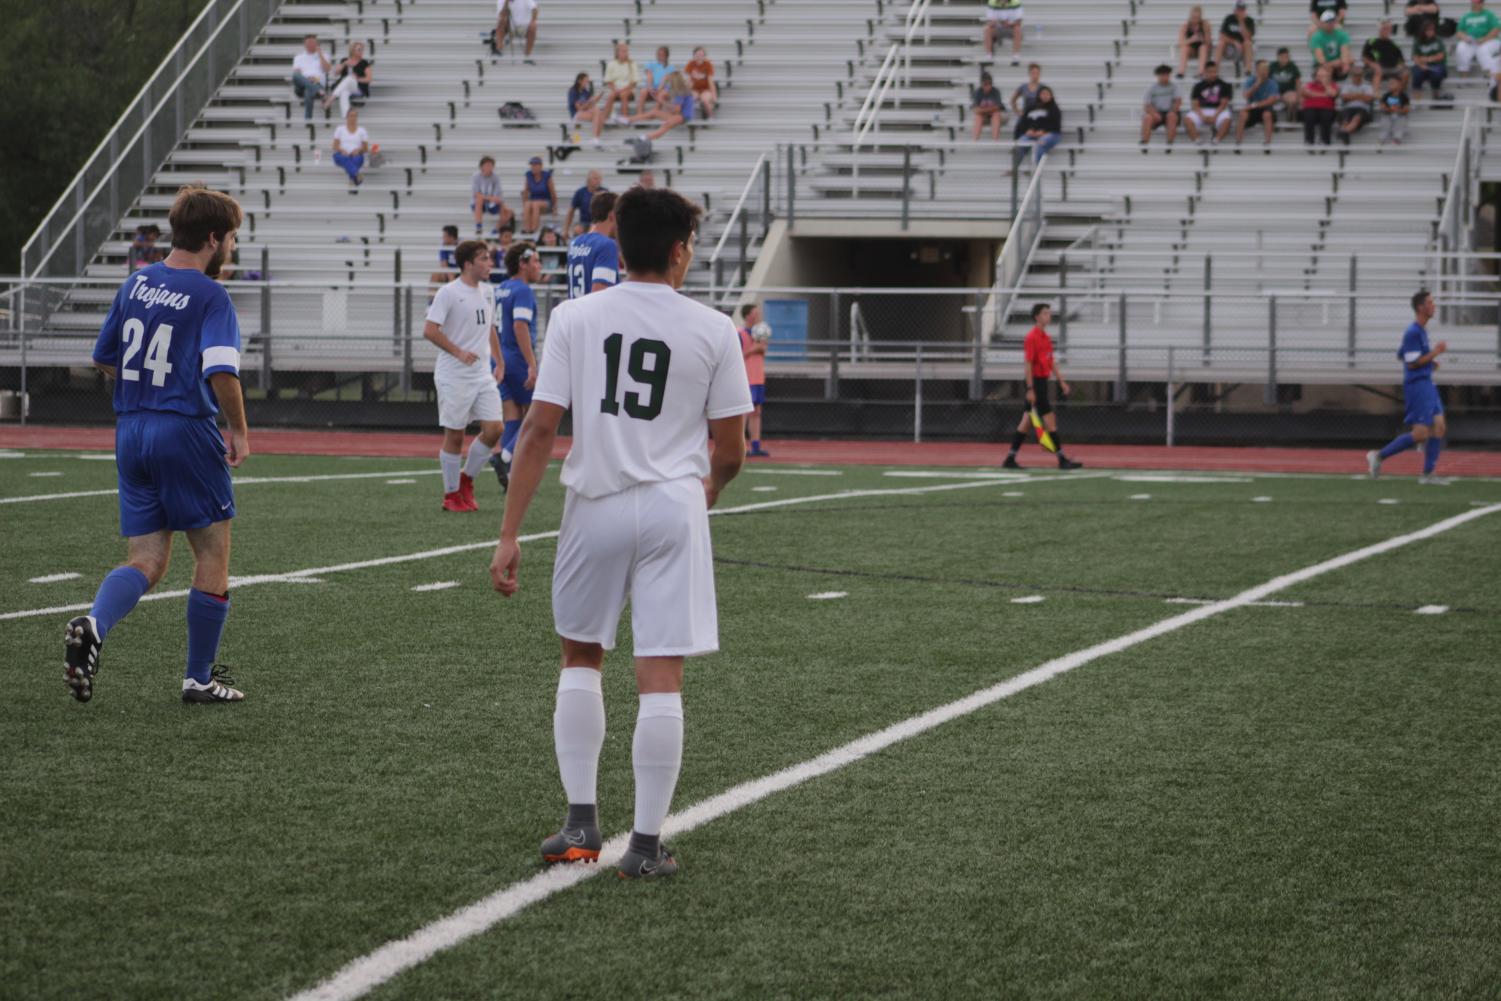 Derby+vs.+Andover+Soccer+8%2F28%2F18+%28Photos+by+Blake+Chadwick%29